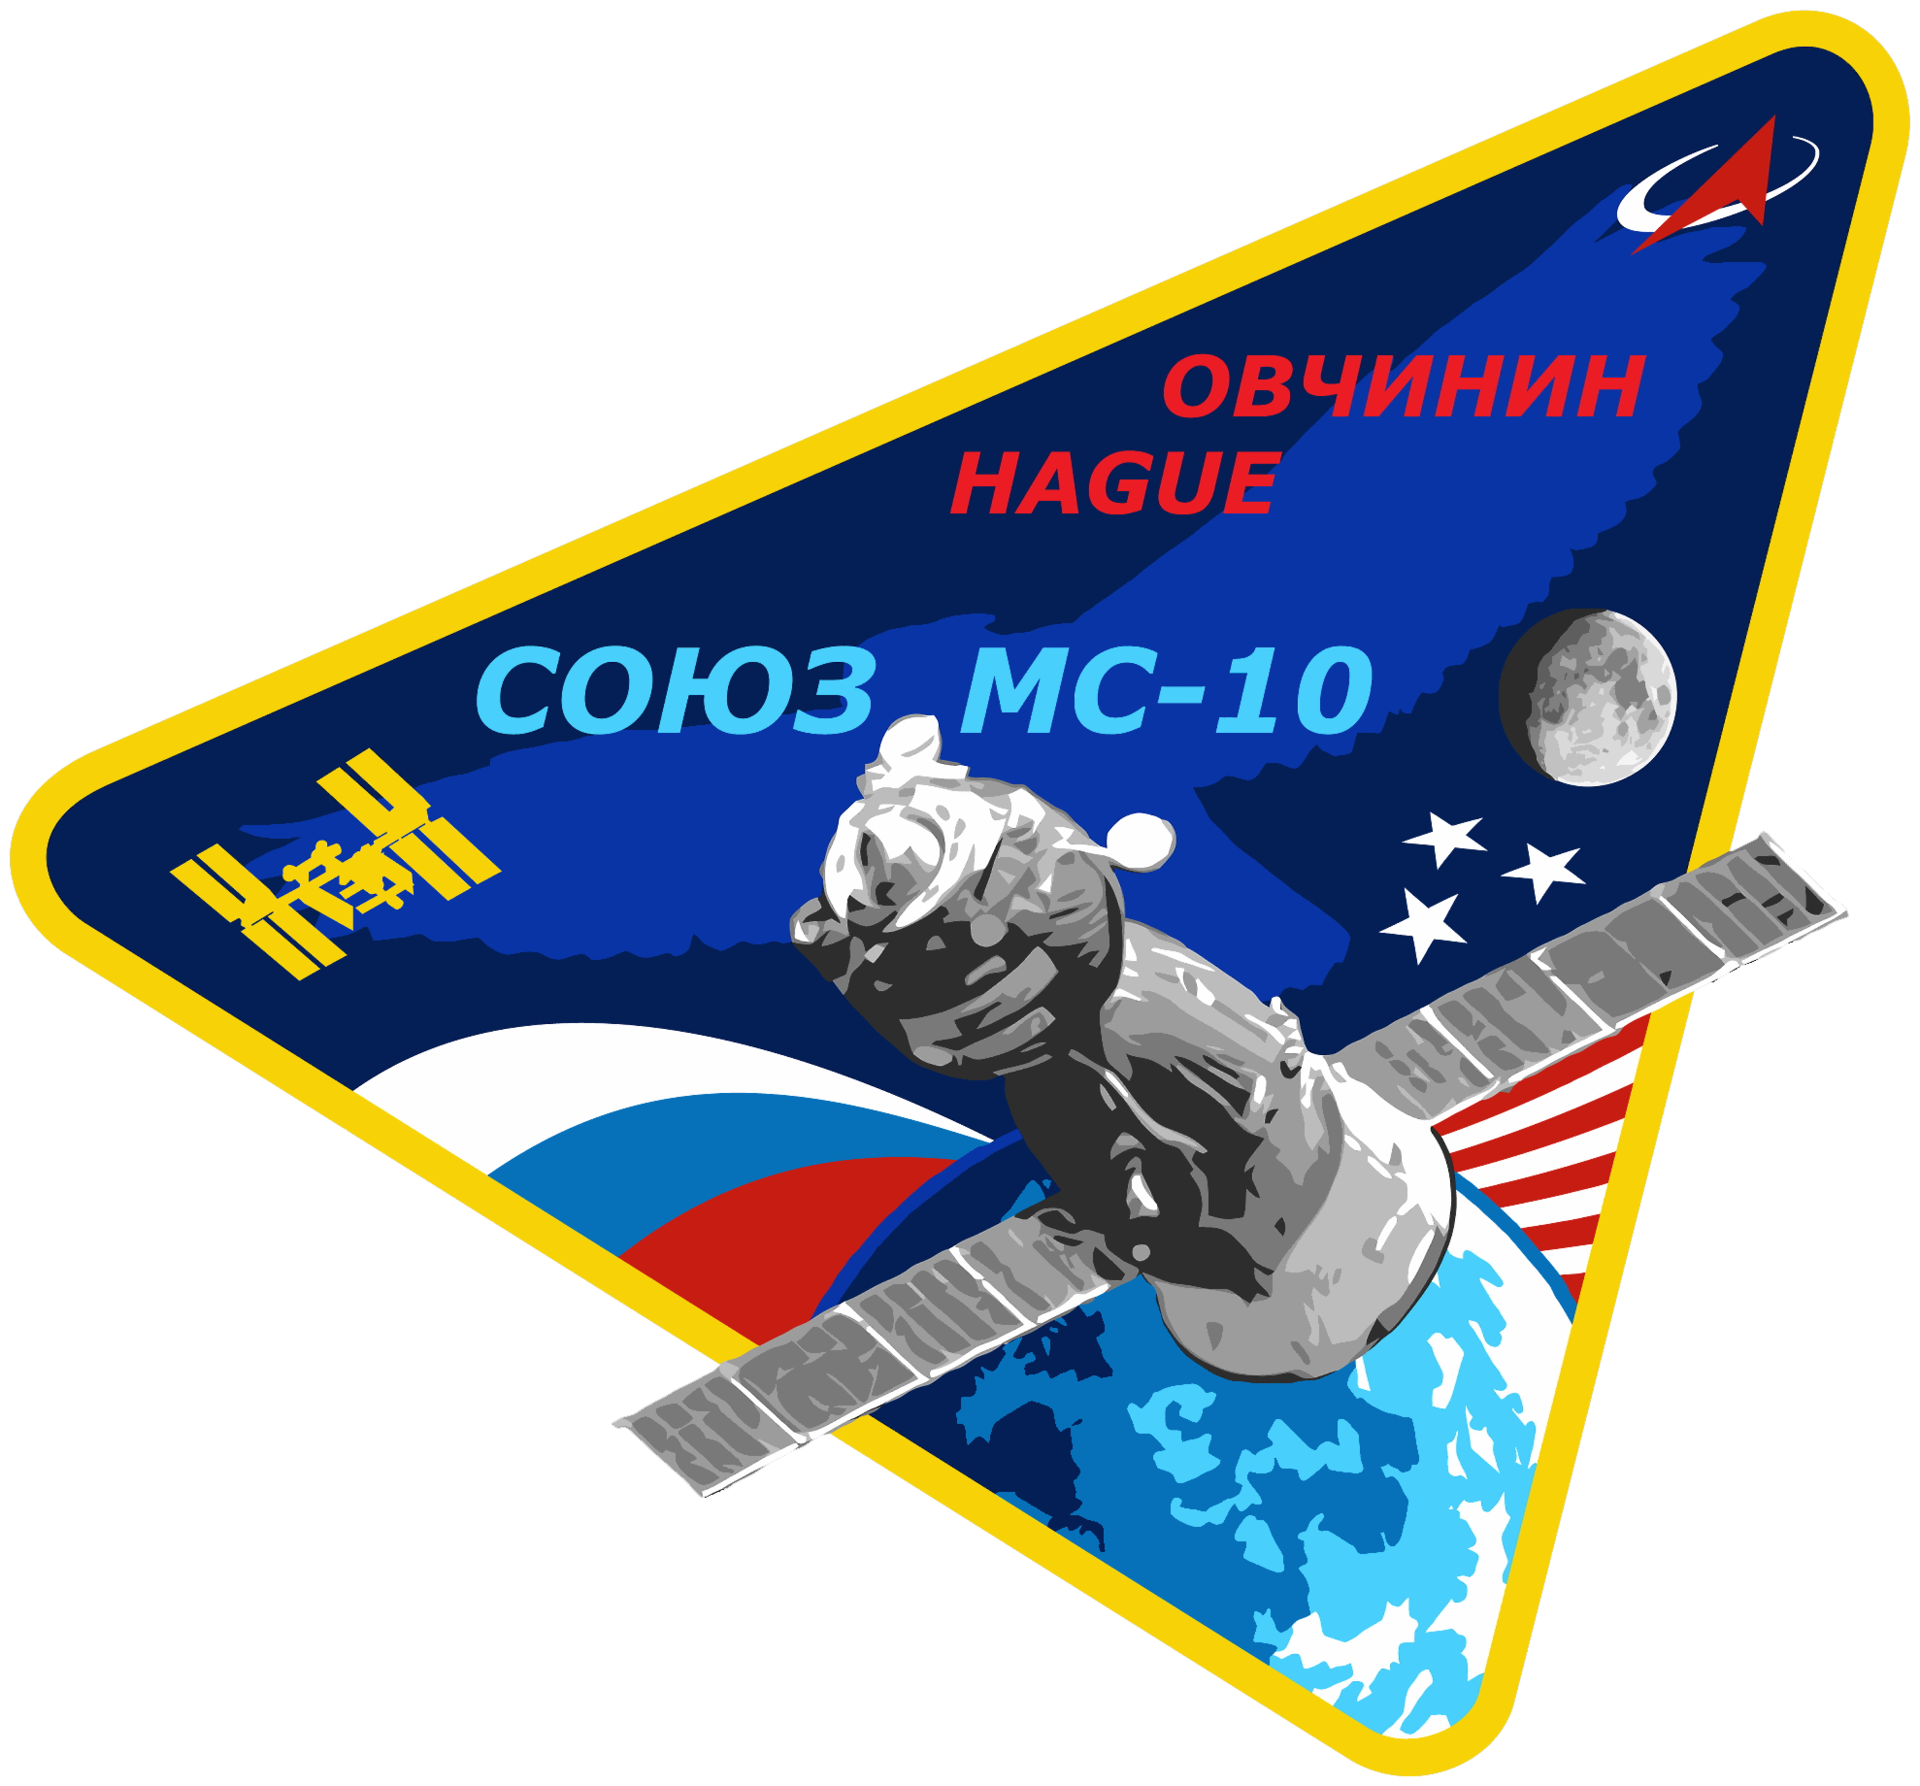 Mission patch for Soyuz MS-10